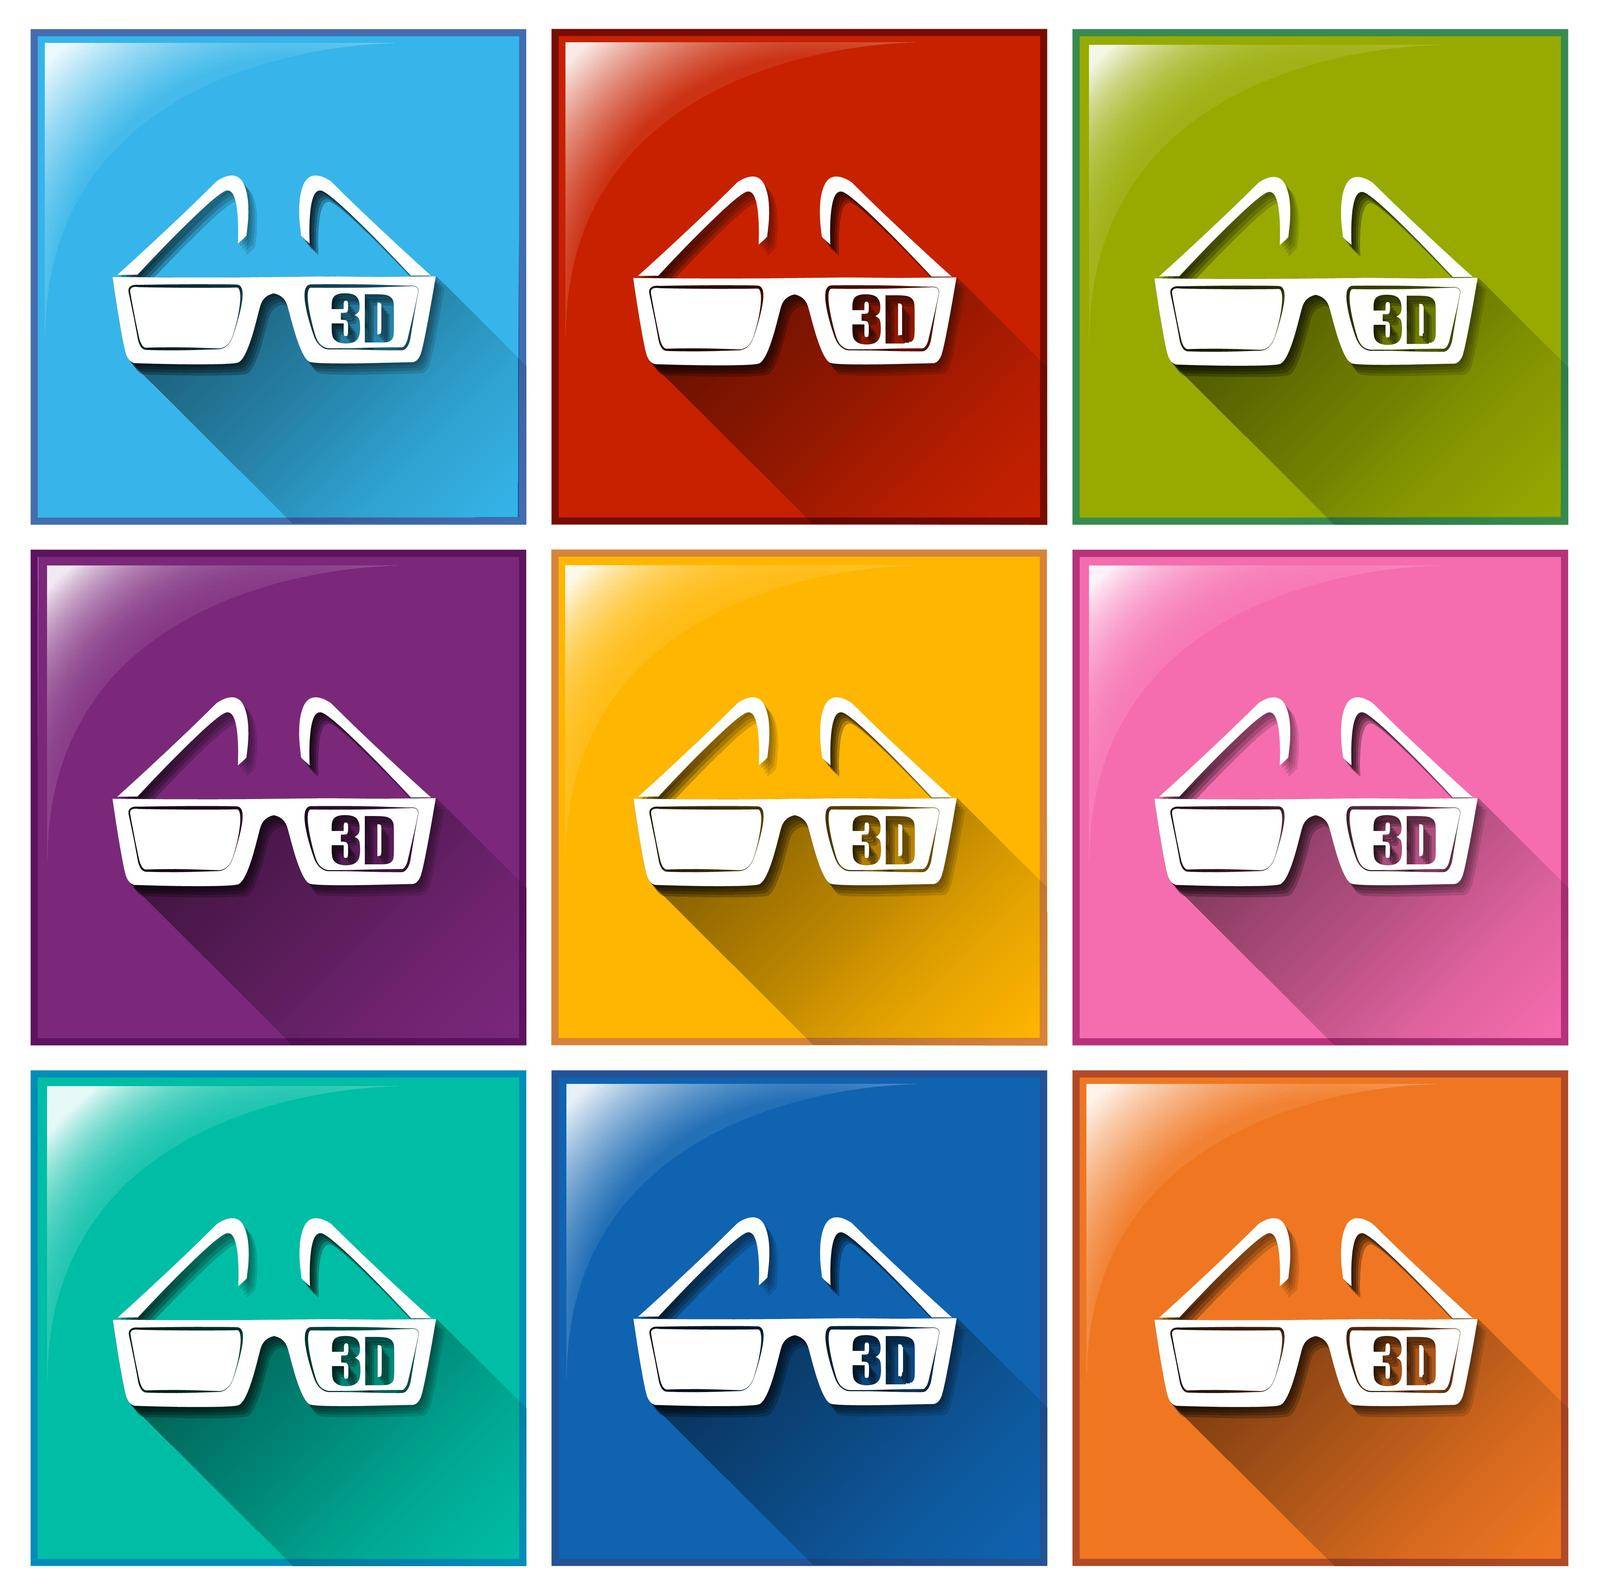 Illustration of the icons with movie 3D eyewear on a white background